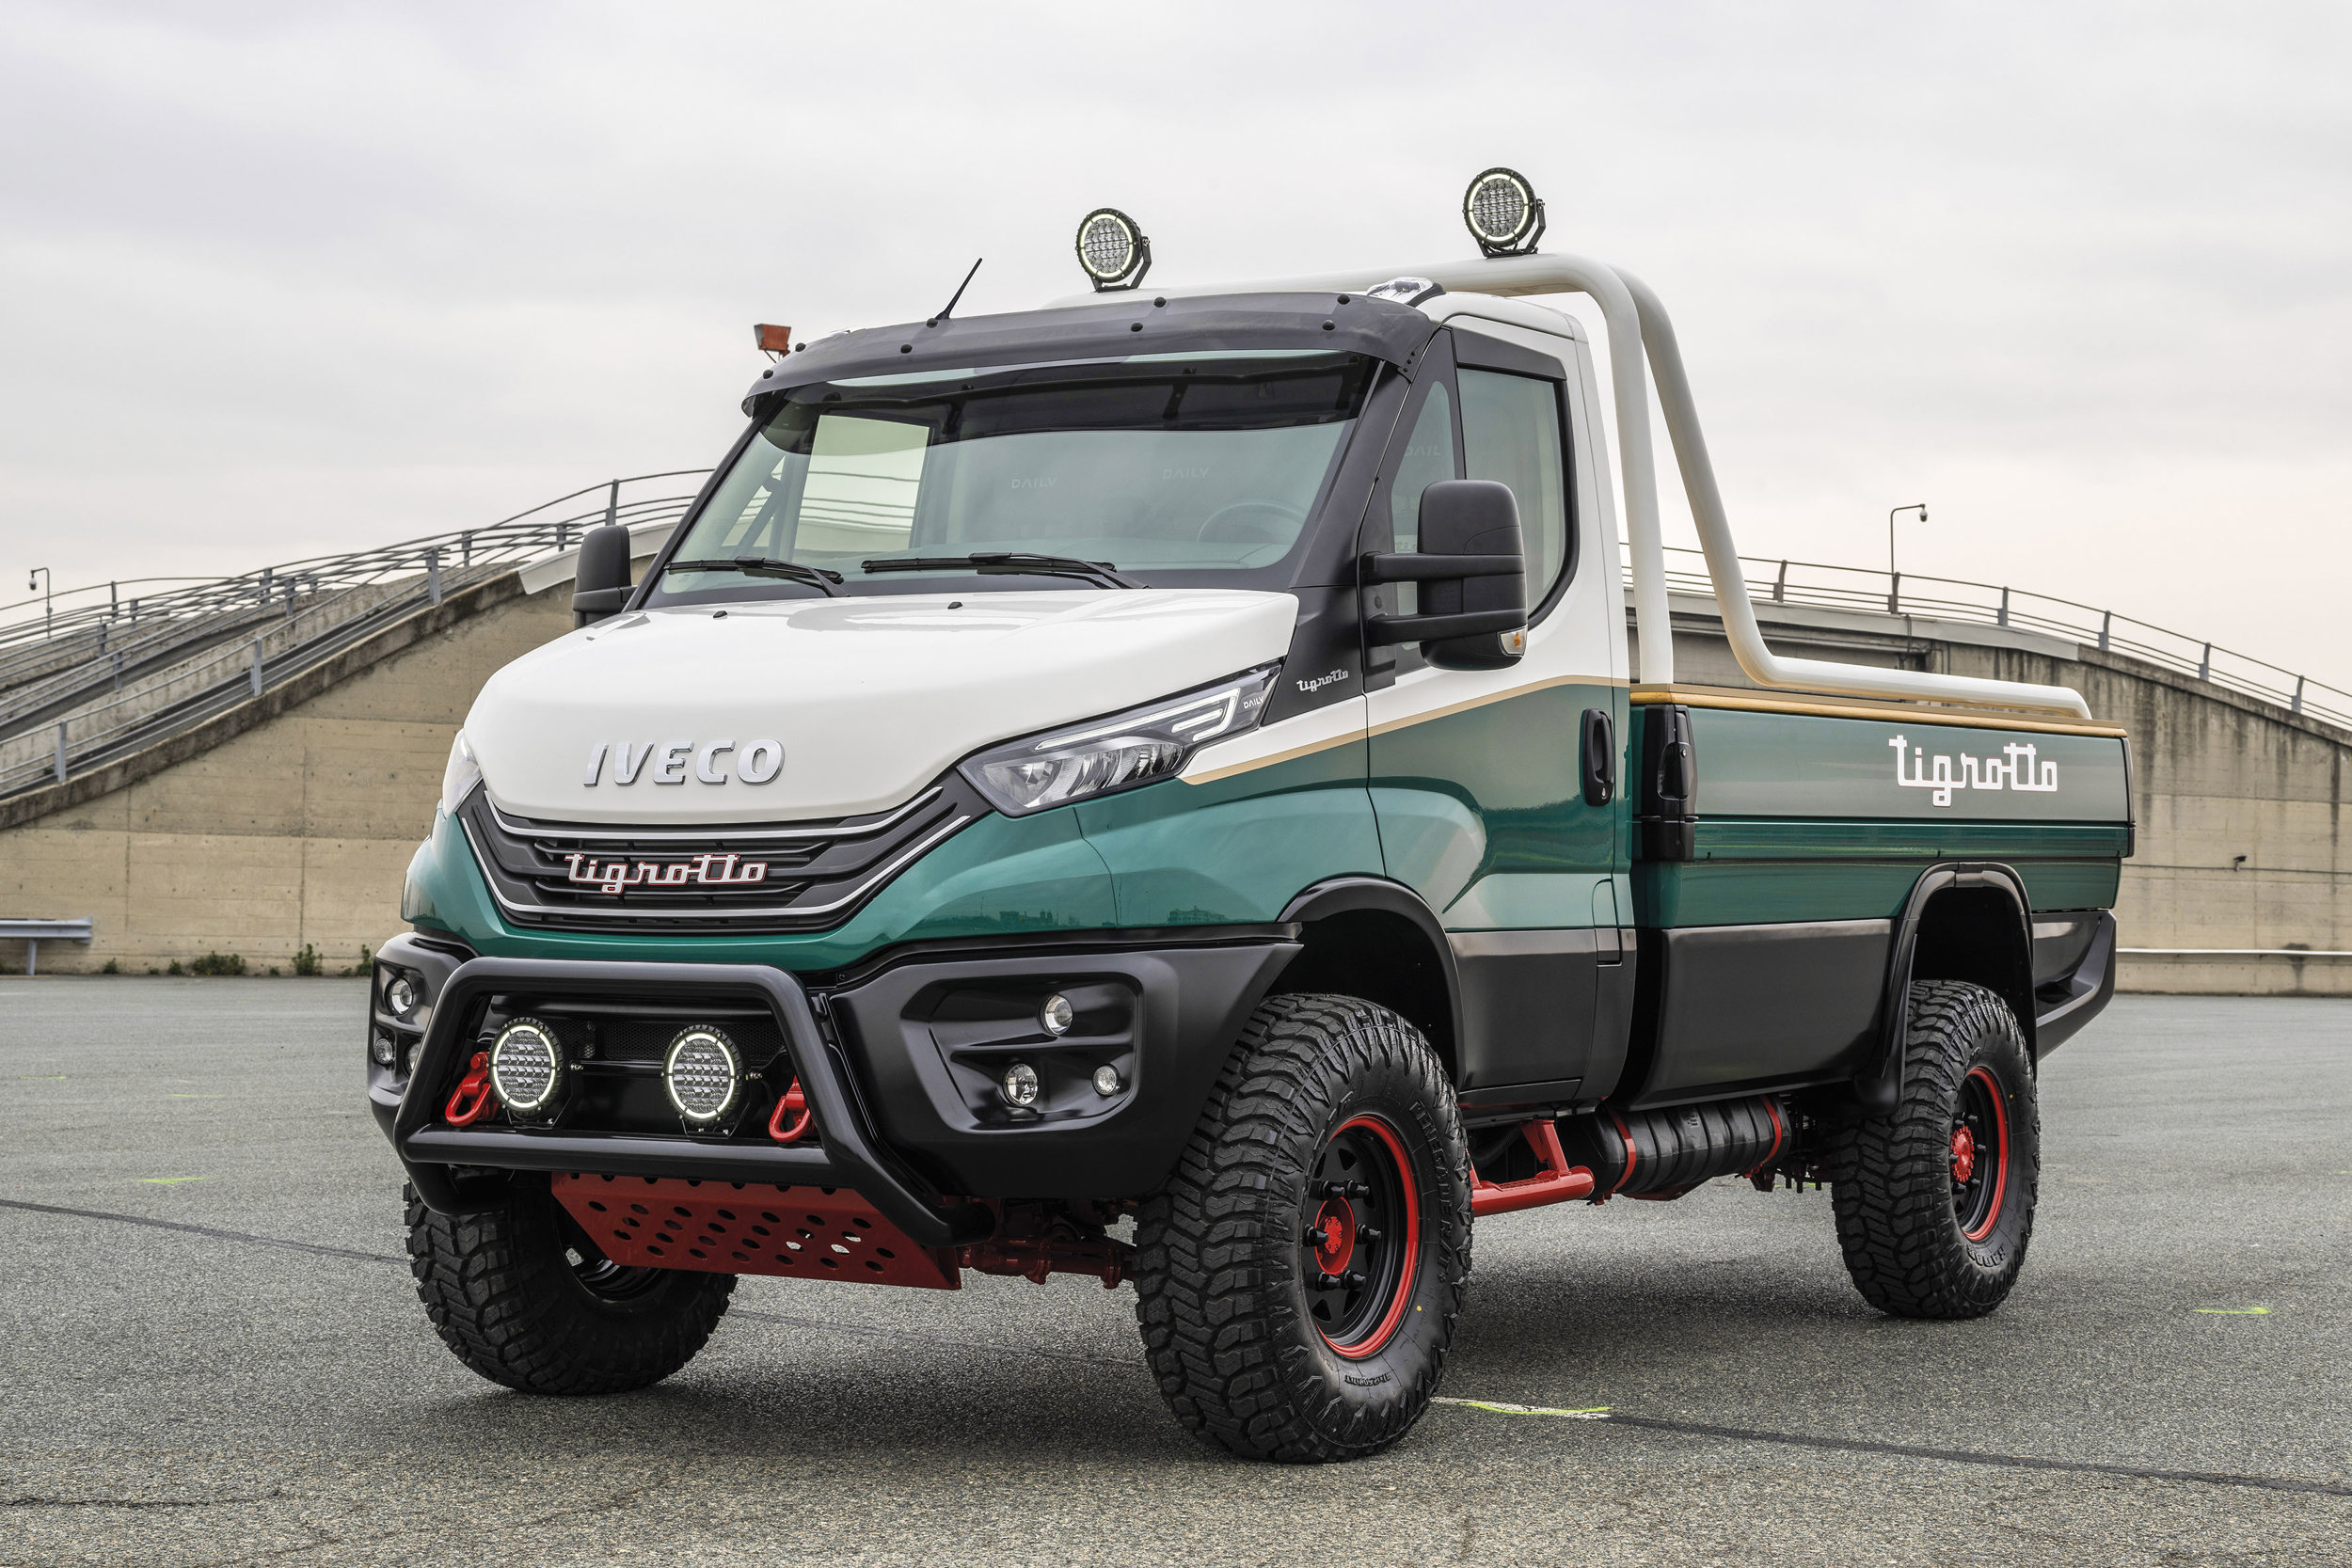 Iveco produces Daily 4x4 Tigrotto in right-hand drive